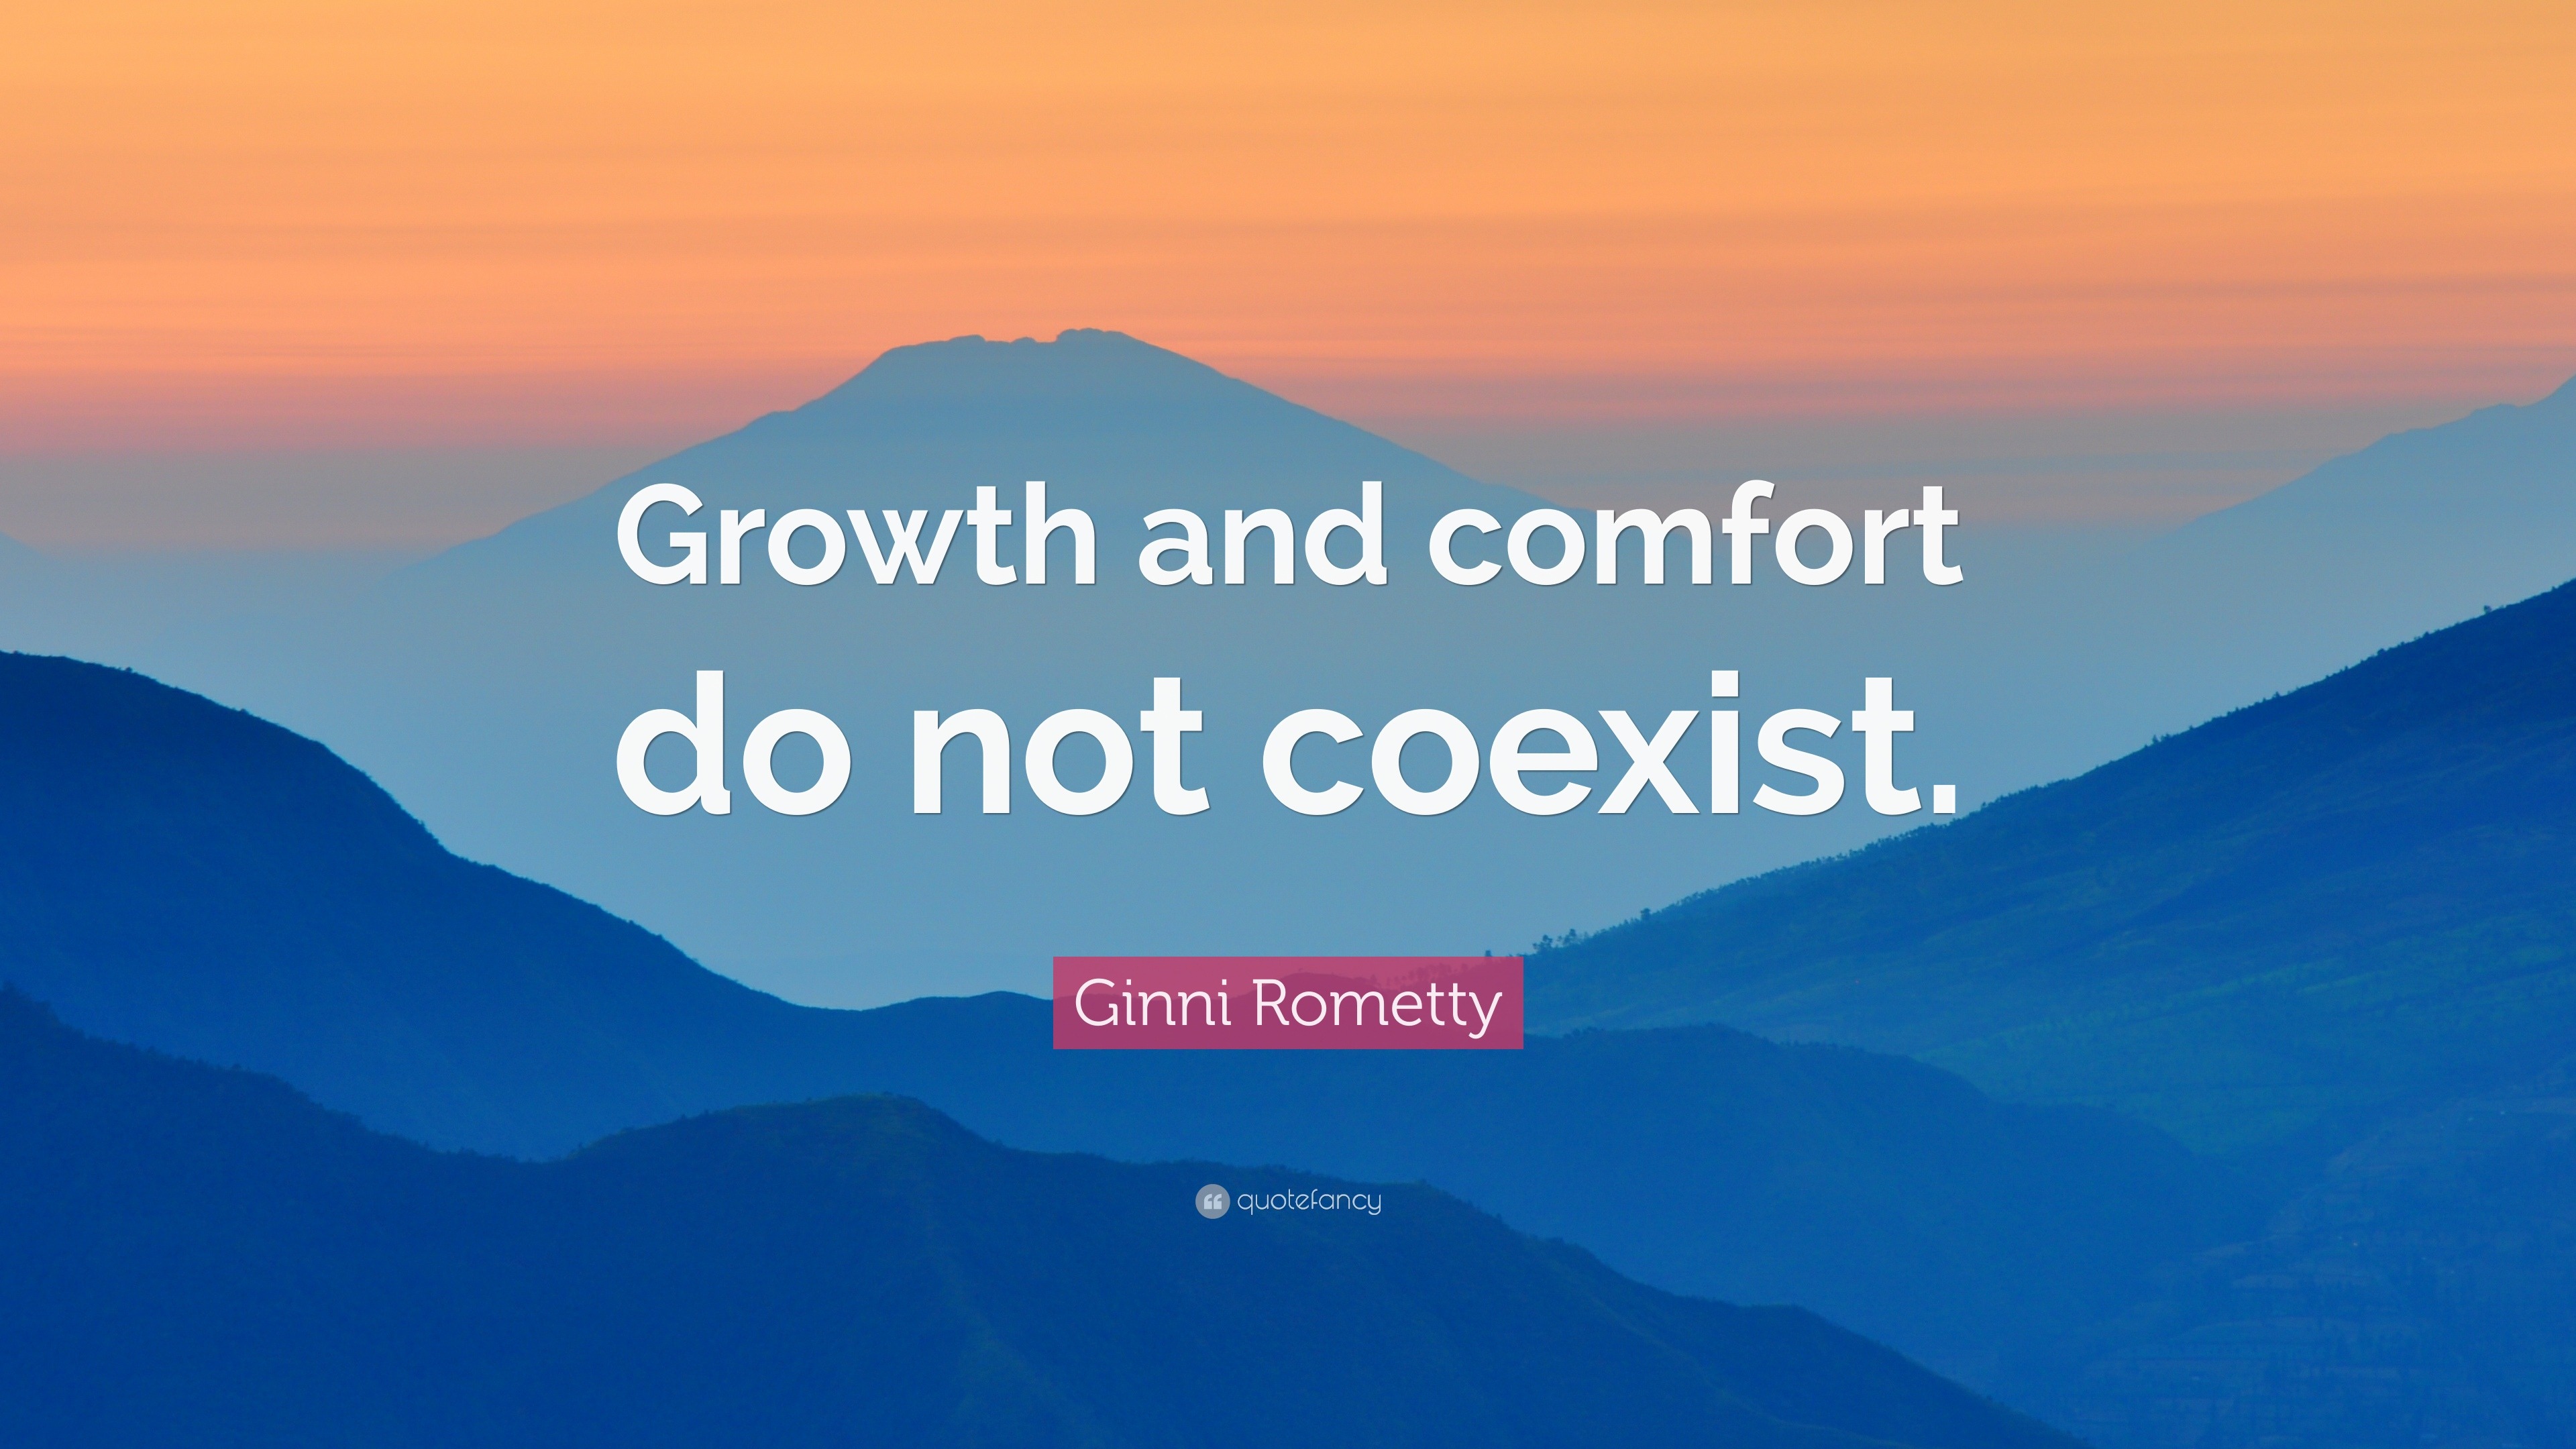 quotes about growth